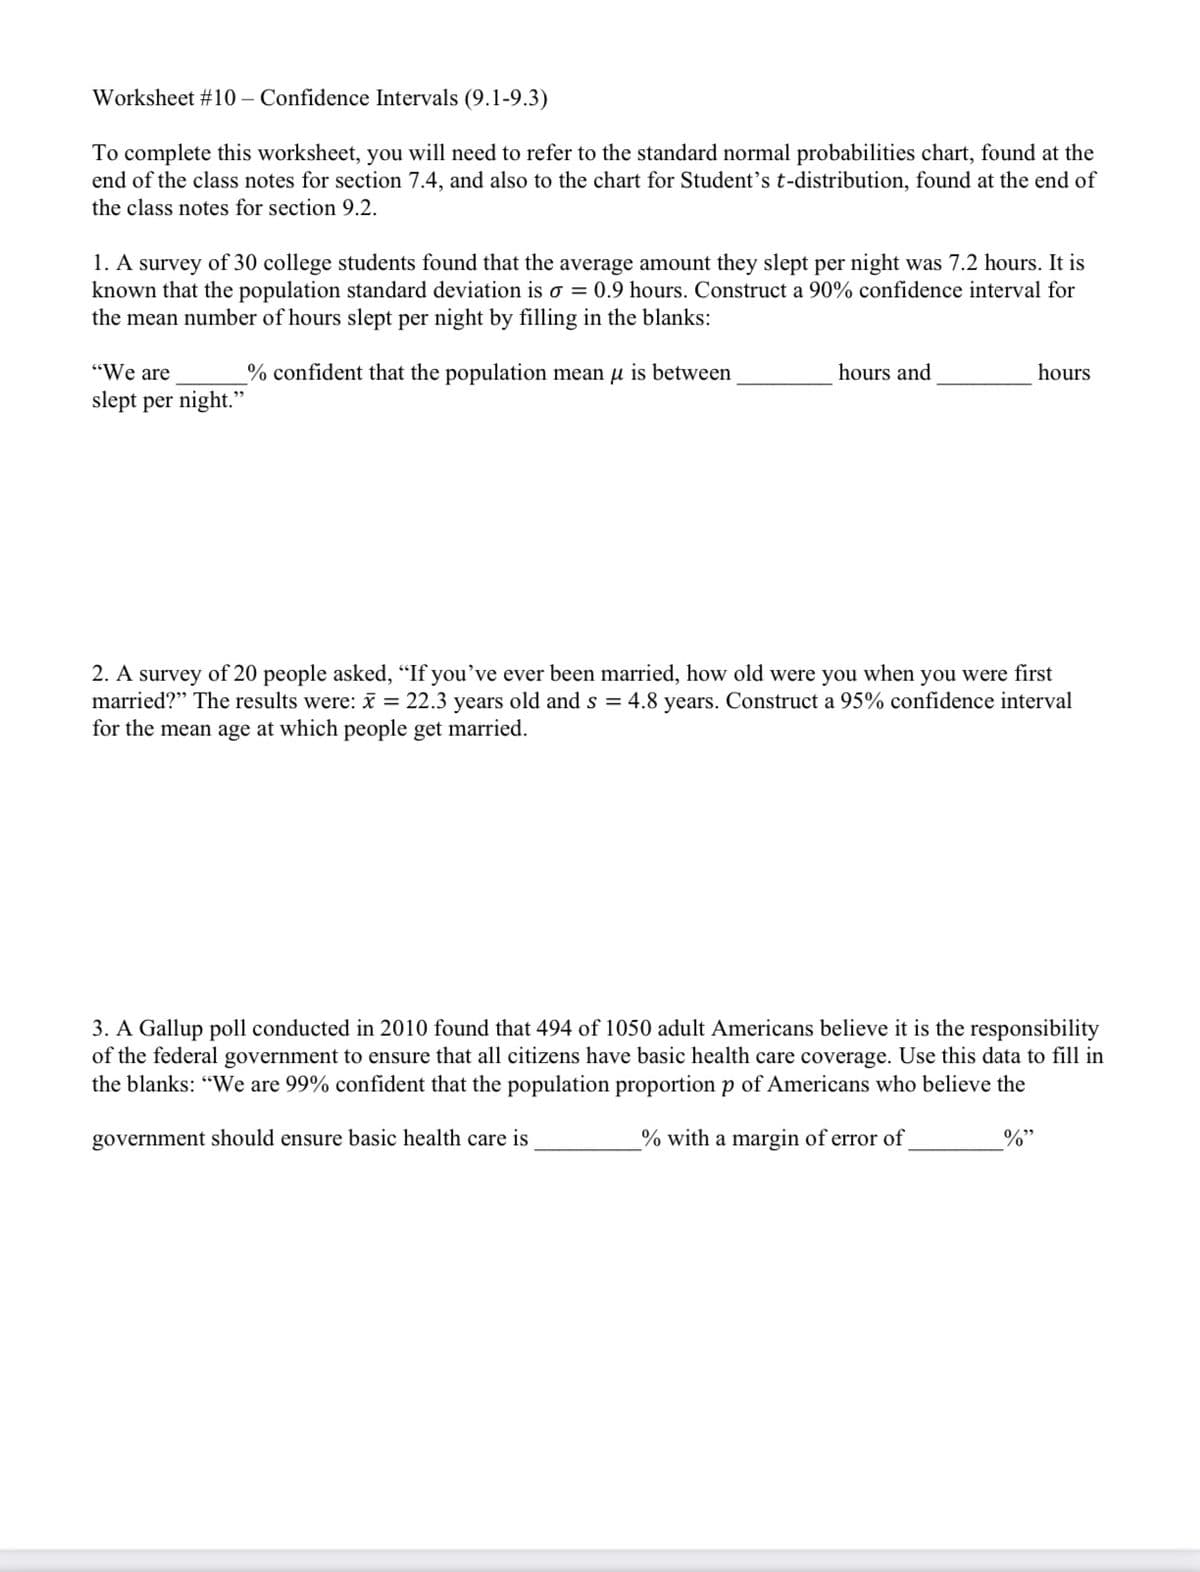 Worksheet #10 – Confidence Intervals (9.1-9.3)
To complete this worksheet, you will need to refer to the standard normal probabilities chart, found at the
end of the class notes for section 7.4, and also to the chart for Student's t-distribution, found at the end of
the class notes for section 9.2.
1. A survey of 30 college students found that the average amount they slept per night was 7.2 hours. It is
known that the population standard deviation is o = 0.9 hours. Construct a 90% confidence interval for
the mean number of hours slept per night by filling in the blanks:
"We are
% confident that the population mean u is between
hours and
hours
slept per night."
2. A survey of 20 people asked, "If you've ever been married, how old were you when you were first
married?" The results were: = 22.3 years old and s = 4.8 years. Construct a 95% confidence interval
for the mean age at which people get married.
3. A Gallup poll conducted in 2010 found that 494 of 1050 adult Americans believe it is the responsibility
of the federal government to ensure that all citizens have basic health care coverage. Use this data to fill in
the blanks: "We are 99% confident that the population proportion p of Americans who believe the
government should ensure basic health care is
% with a margin of error of
%"
